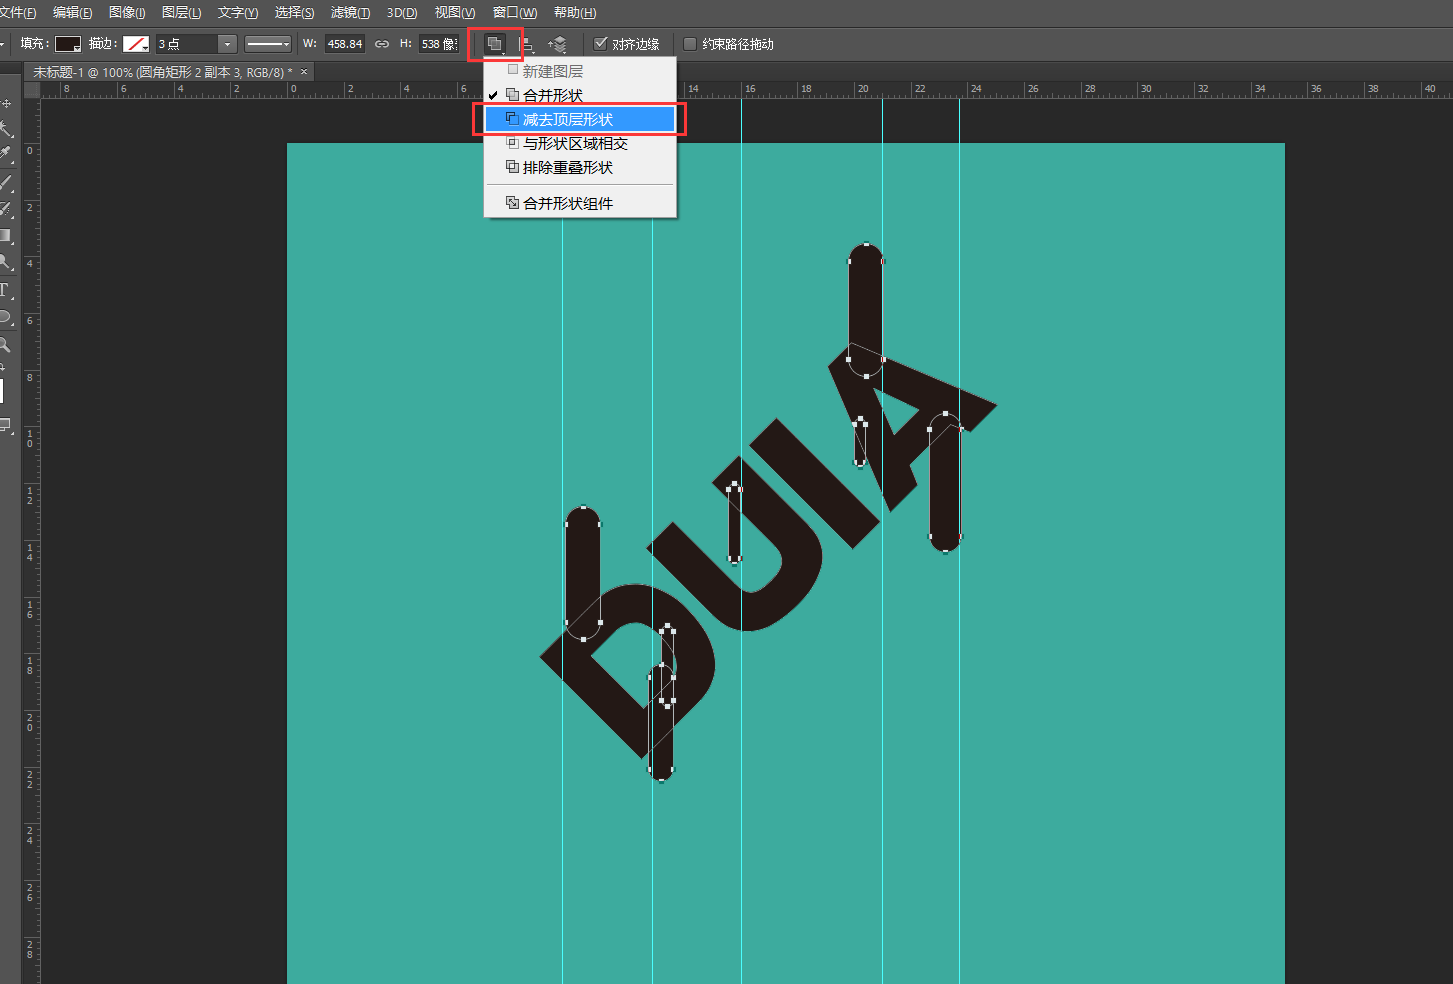 Learn the Easiest Way to Install Custom Fonts with Picsart - Picsart Blog